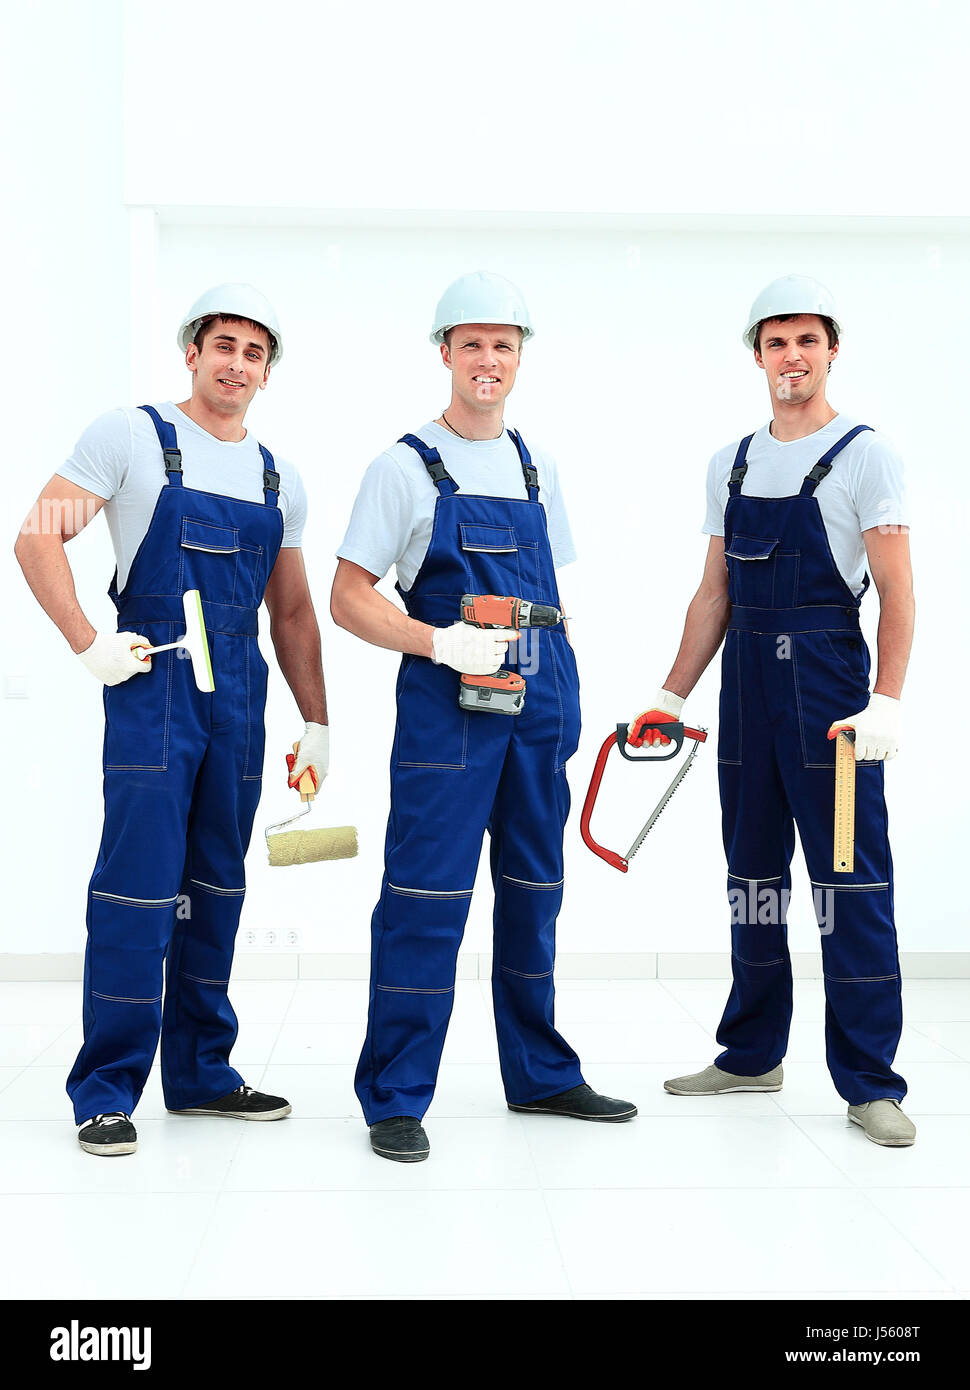 Group of professional industrial workers. Isolated over white background. Stock Photo